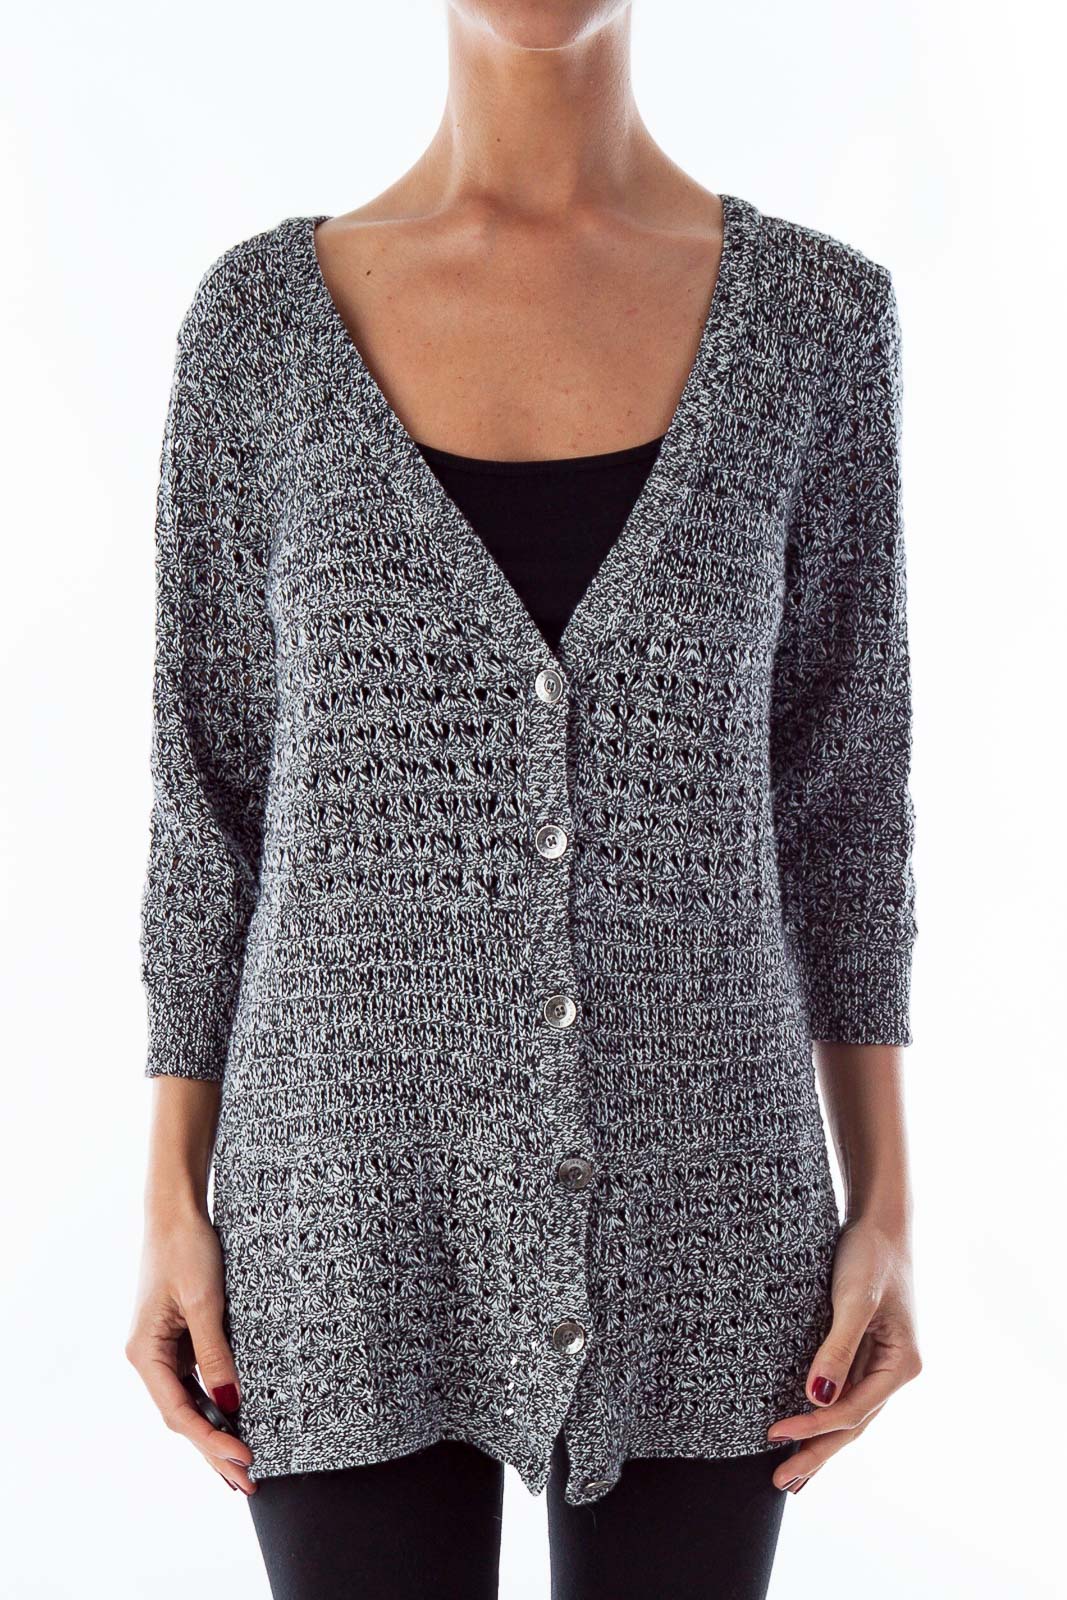 Black and White Knit Cardigan Front